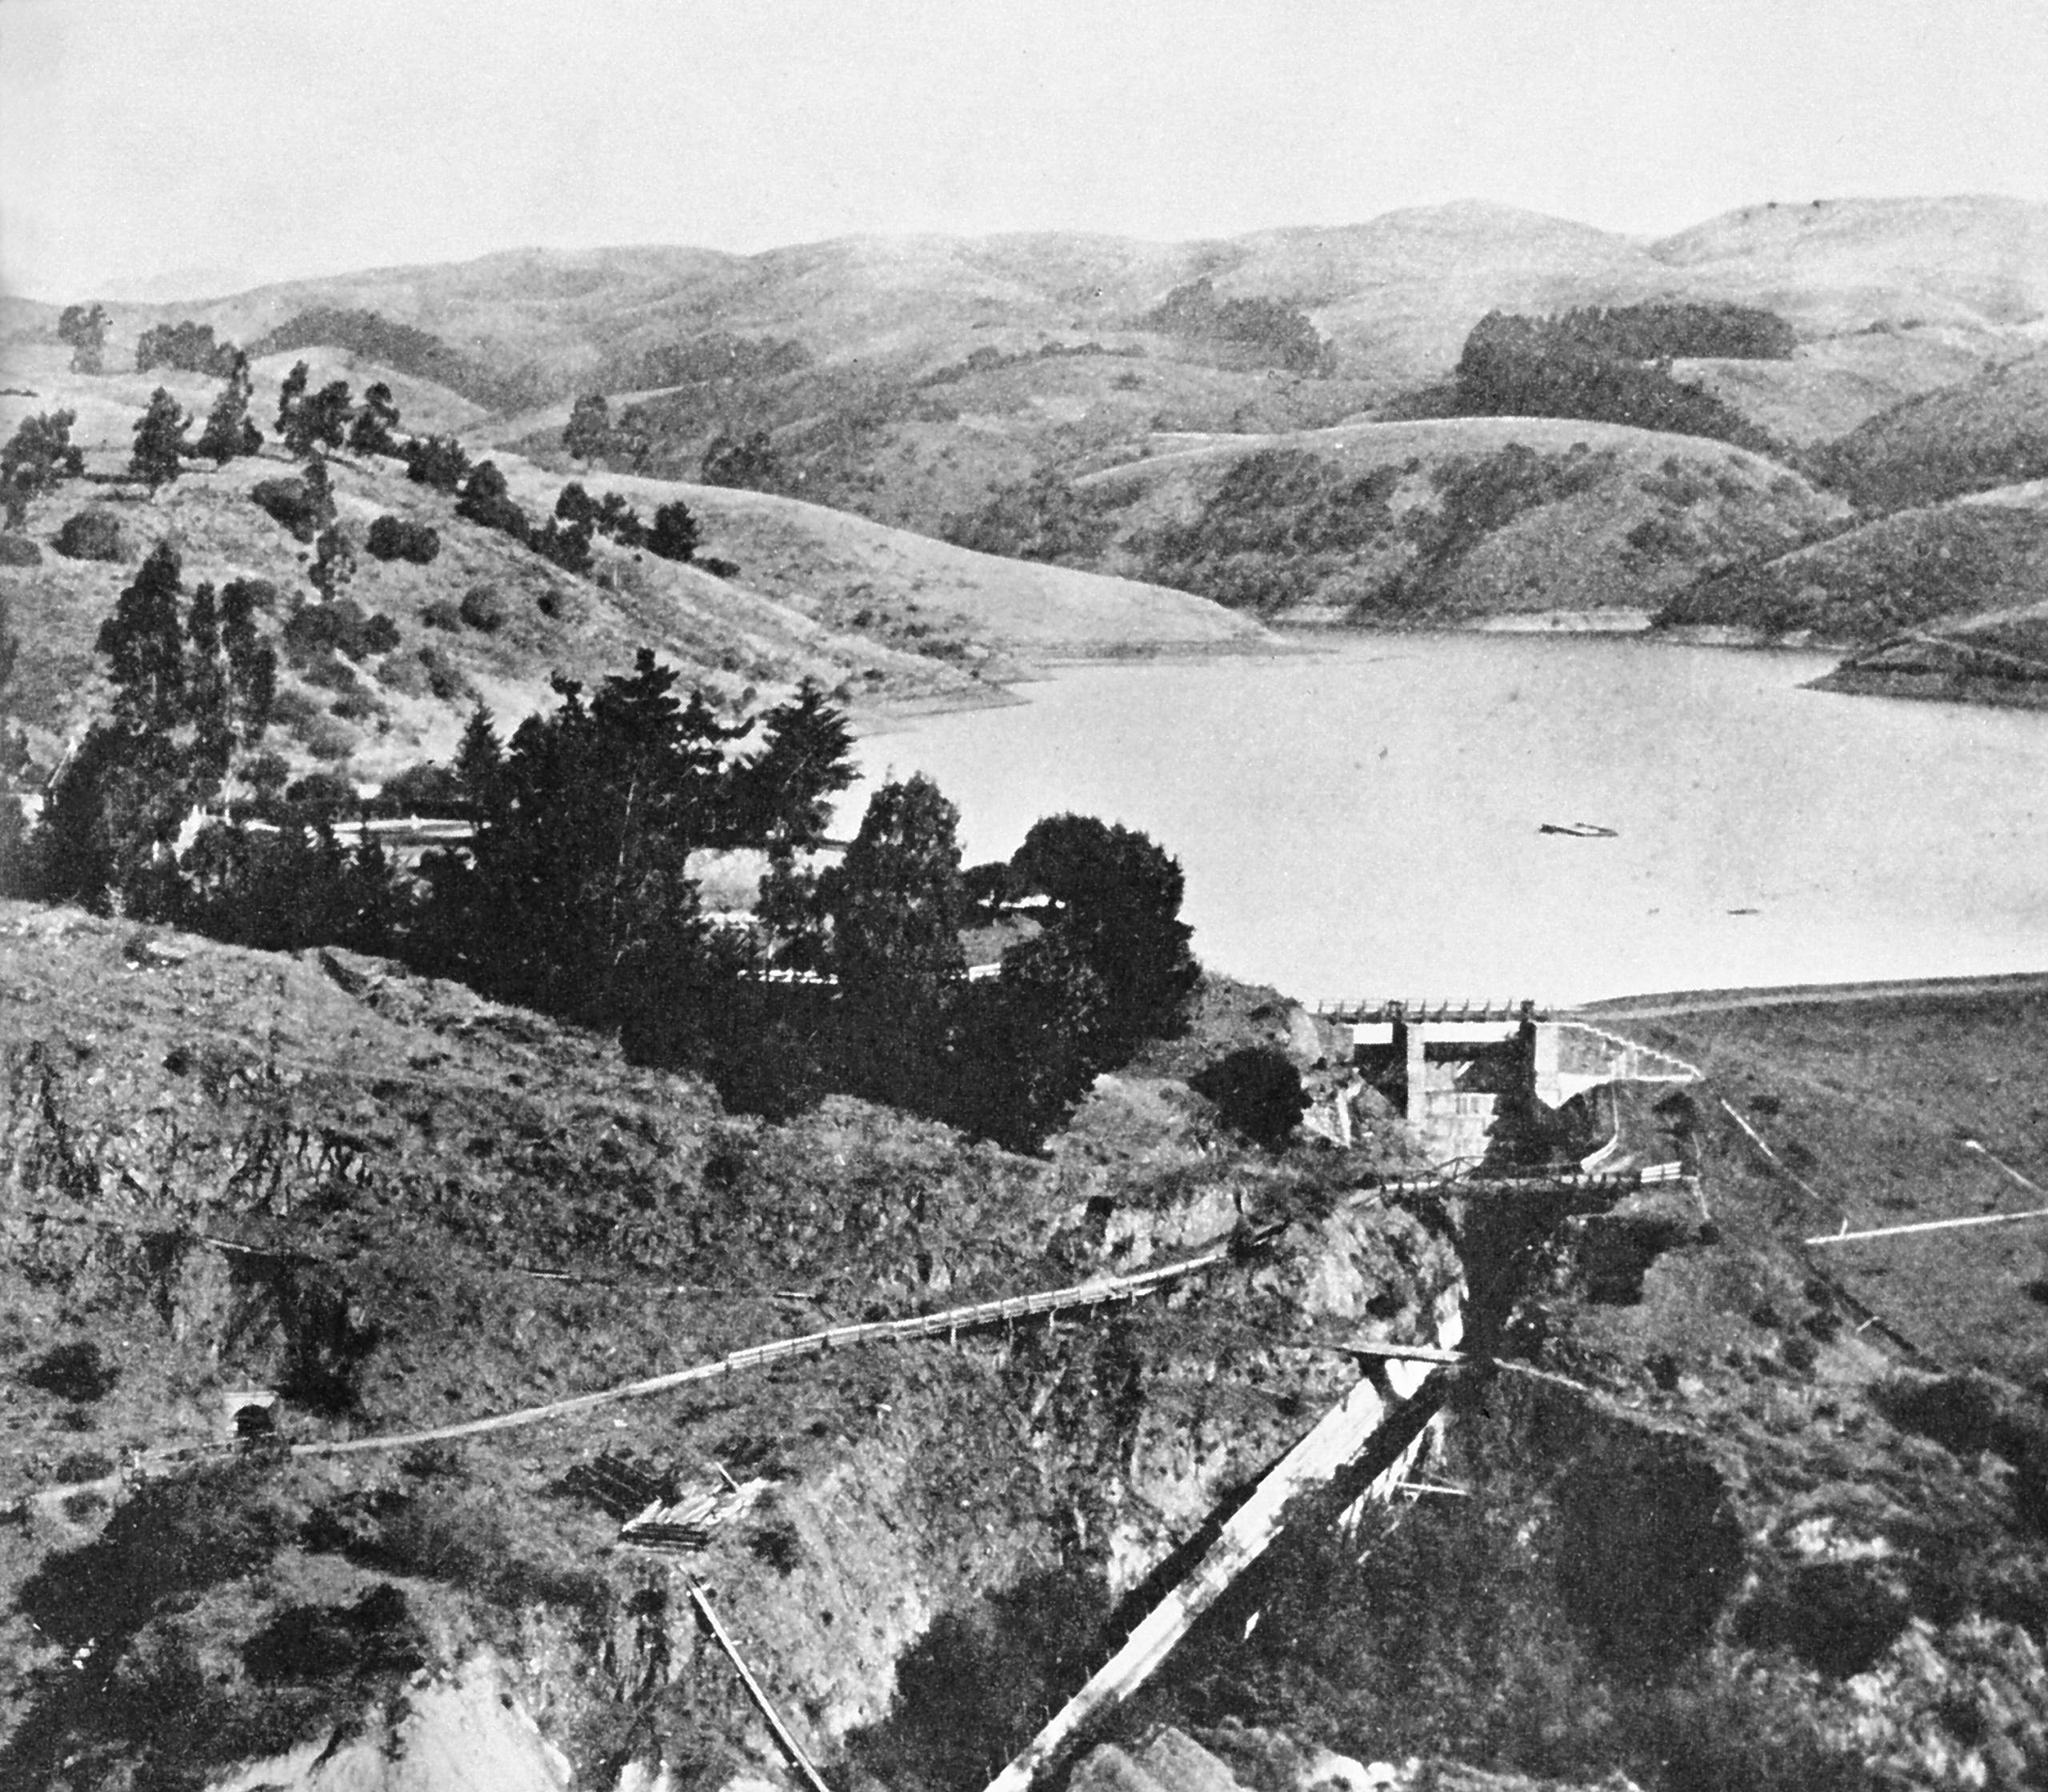 A black and white photo of lake chabot nestled below rolling hills.